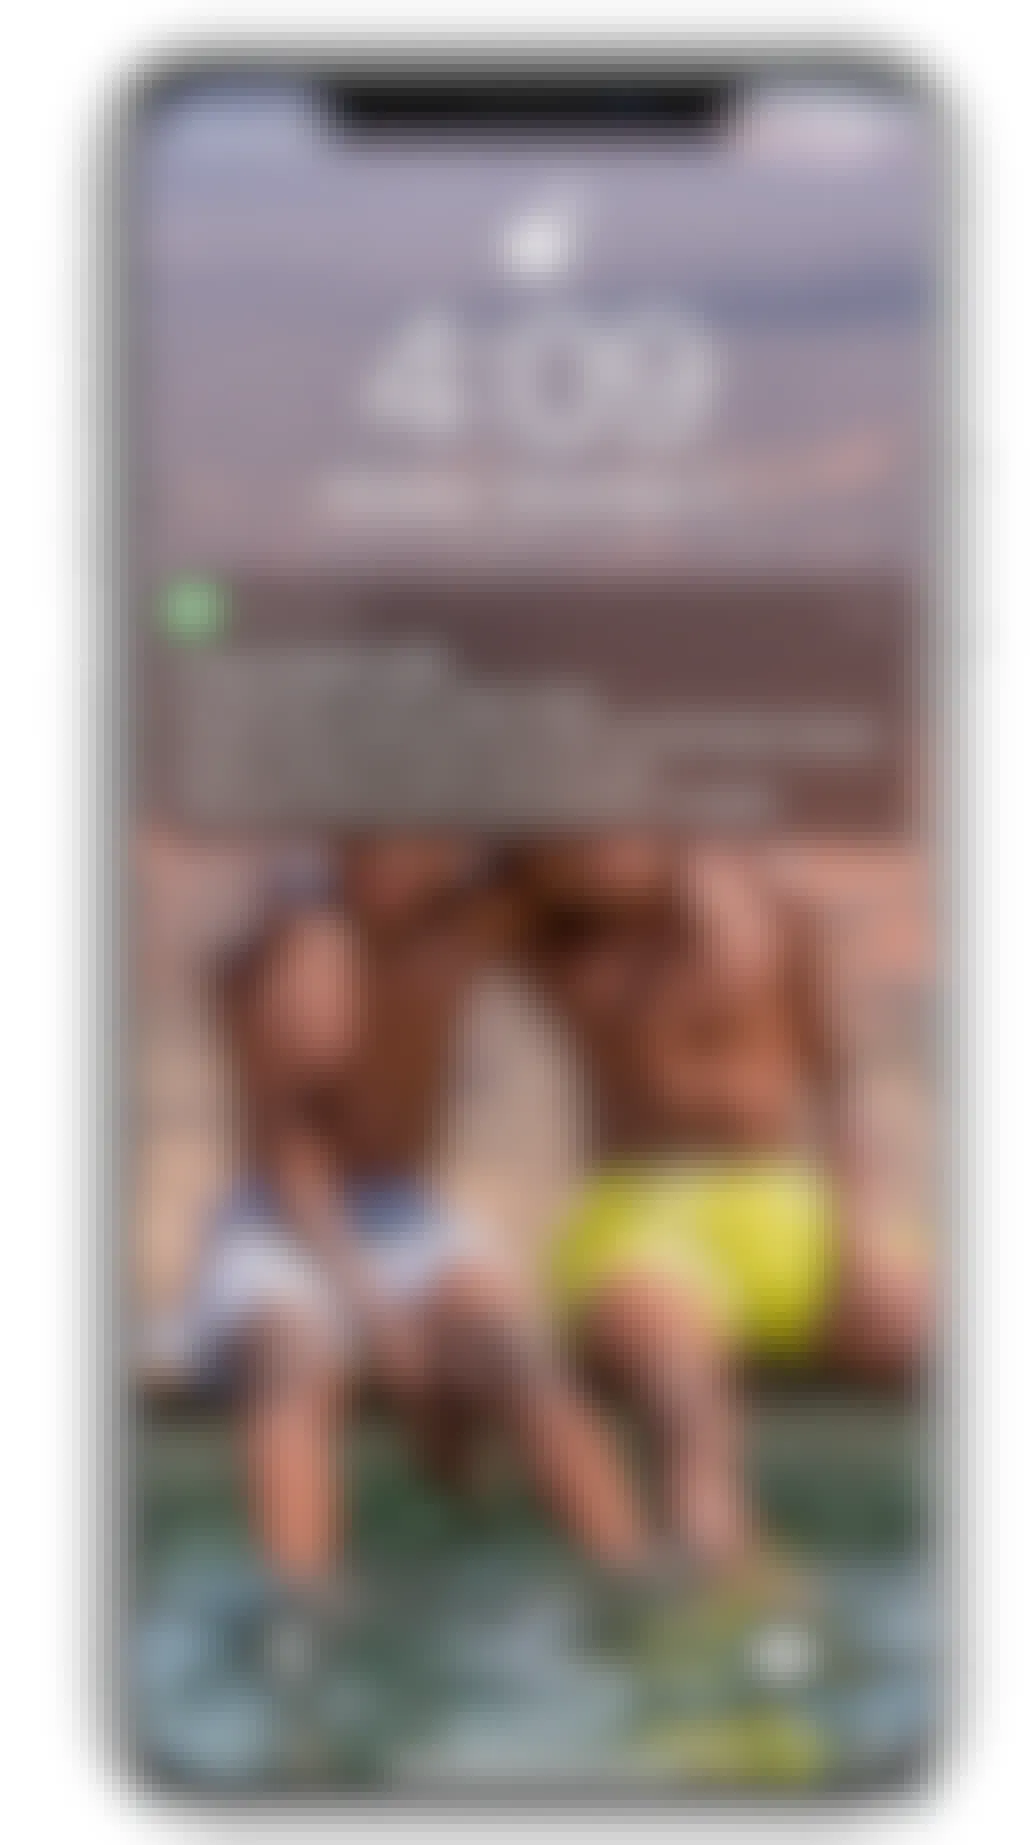 A graphic of an iPhone with a message notification from KCL about the Bath & Body Works candle day sale.